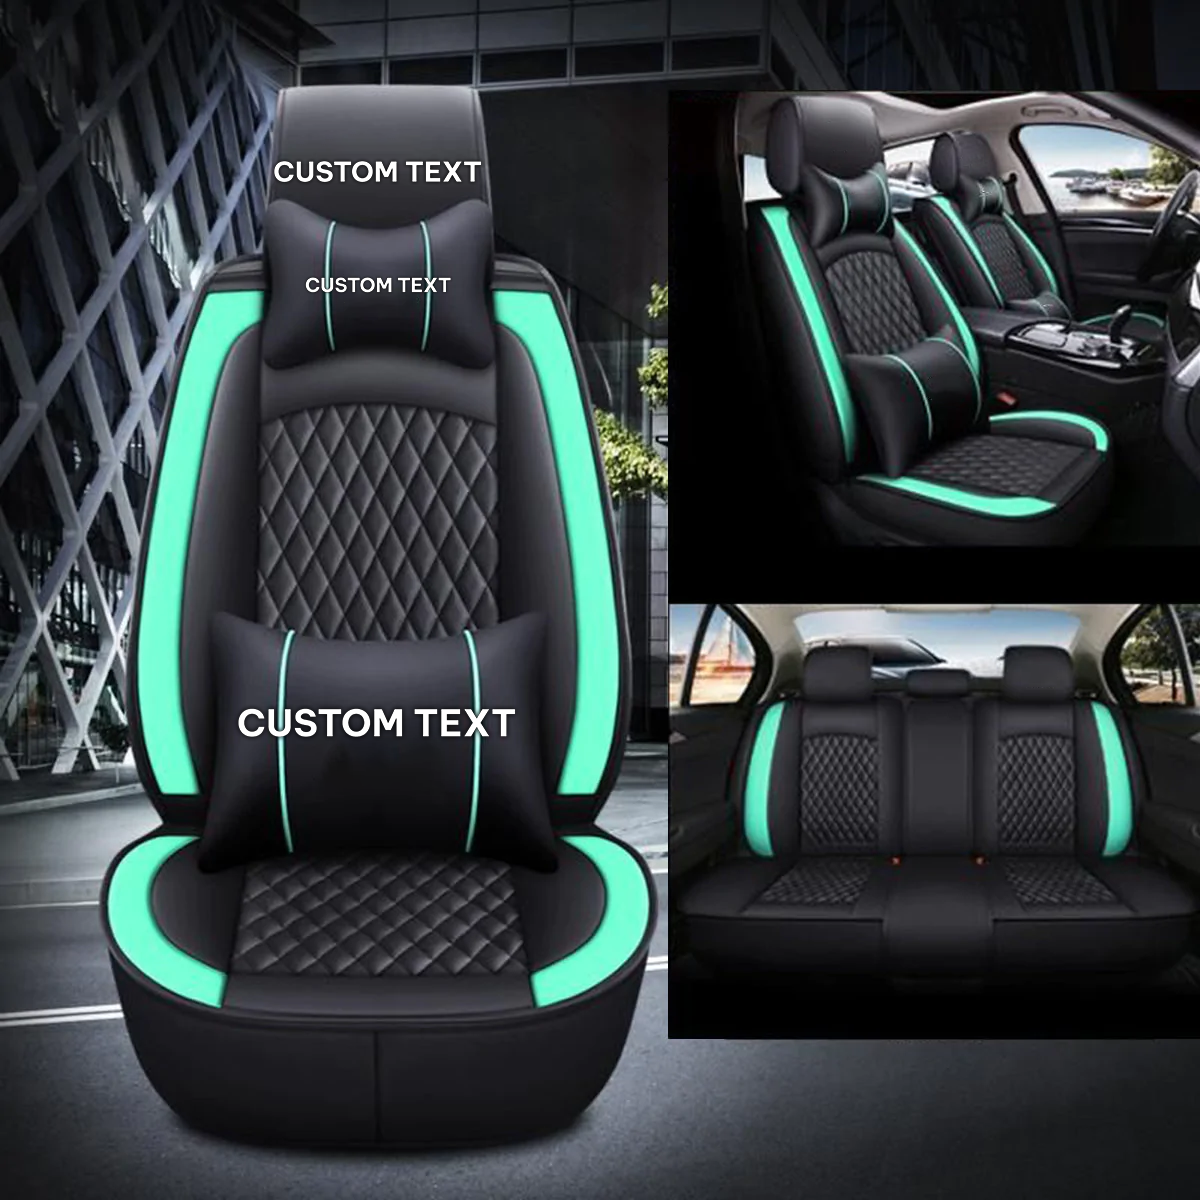 Custom Text For Seat Covers 5 Seats Full Set, Custom Fit For Your Cars, Leatherette Automotive Seat Cushion Protector Universal Fit, Vehicle Auto Interior Decor MS13988